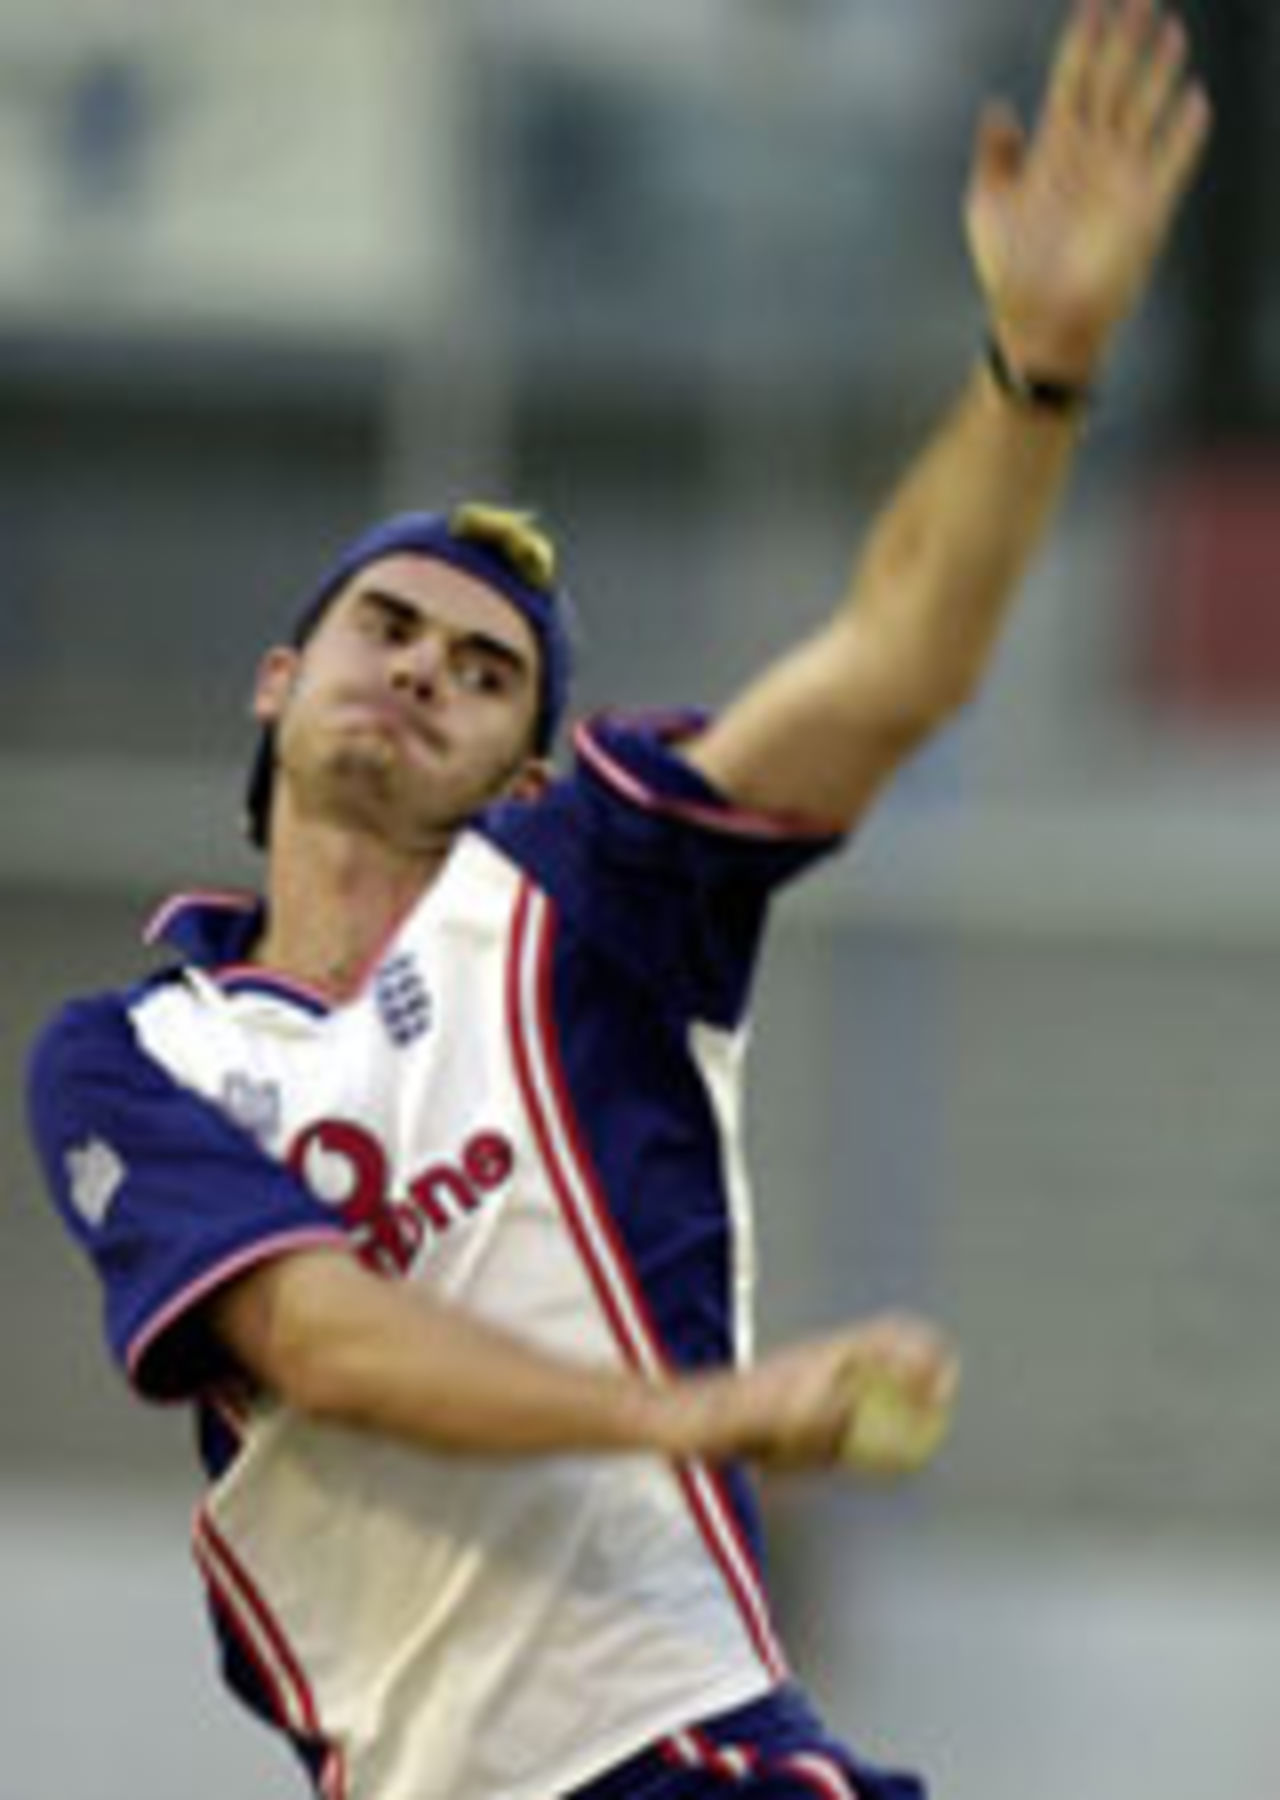 James Anderson bowling in training gear, Chittagong, November 6, 2003